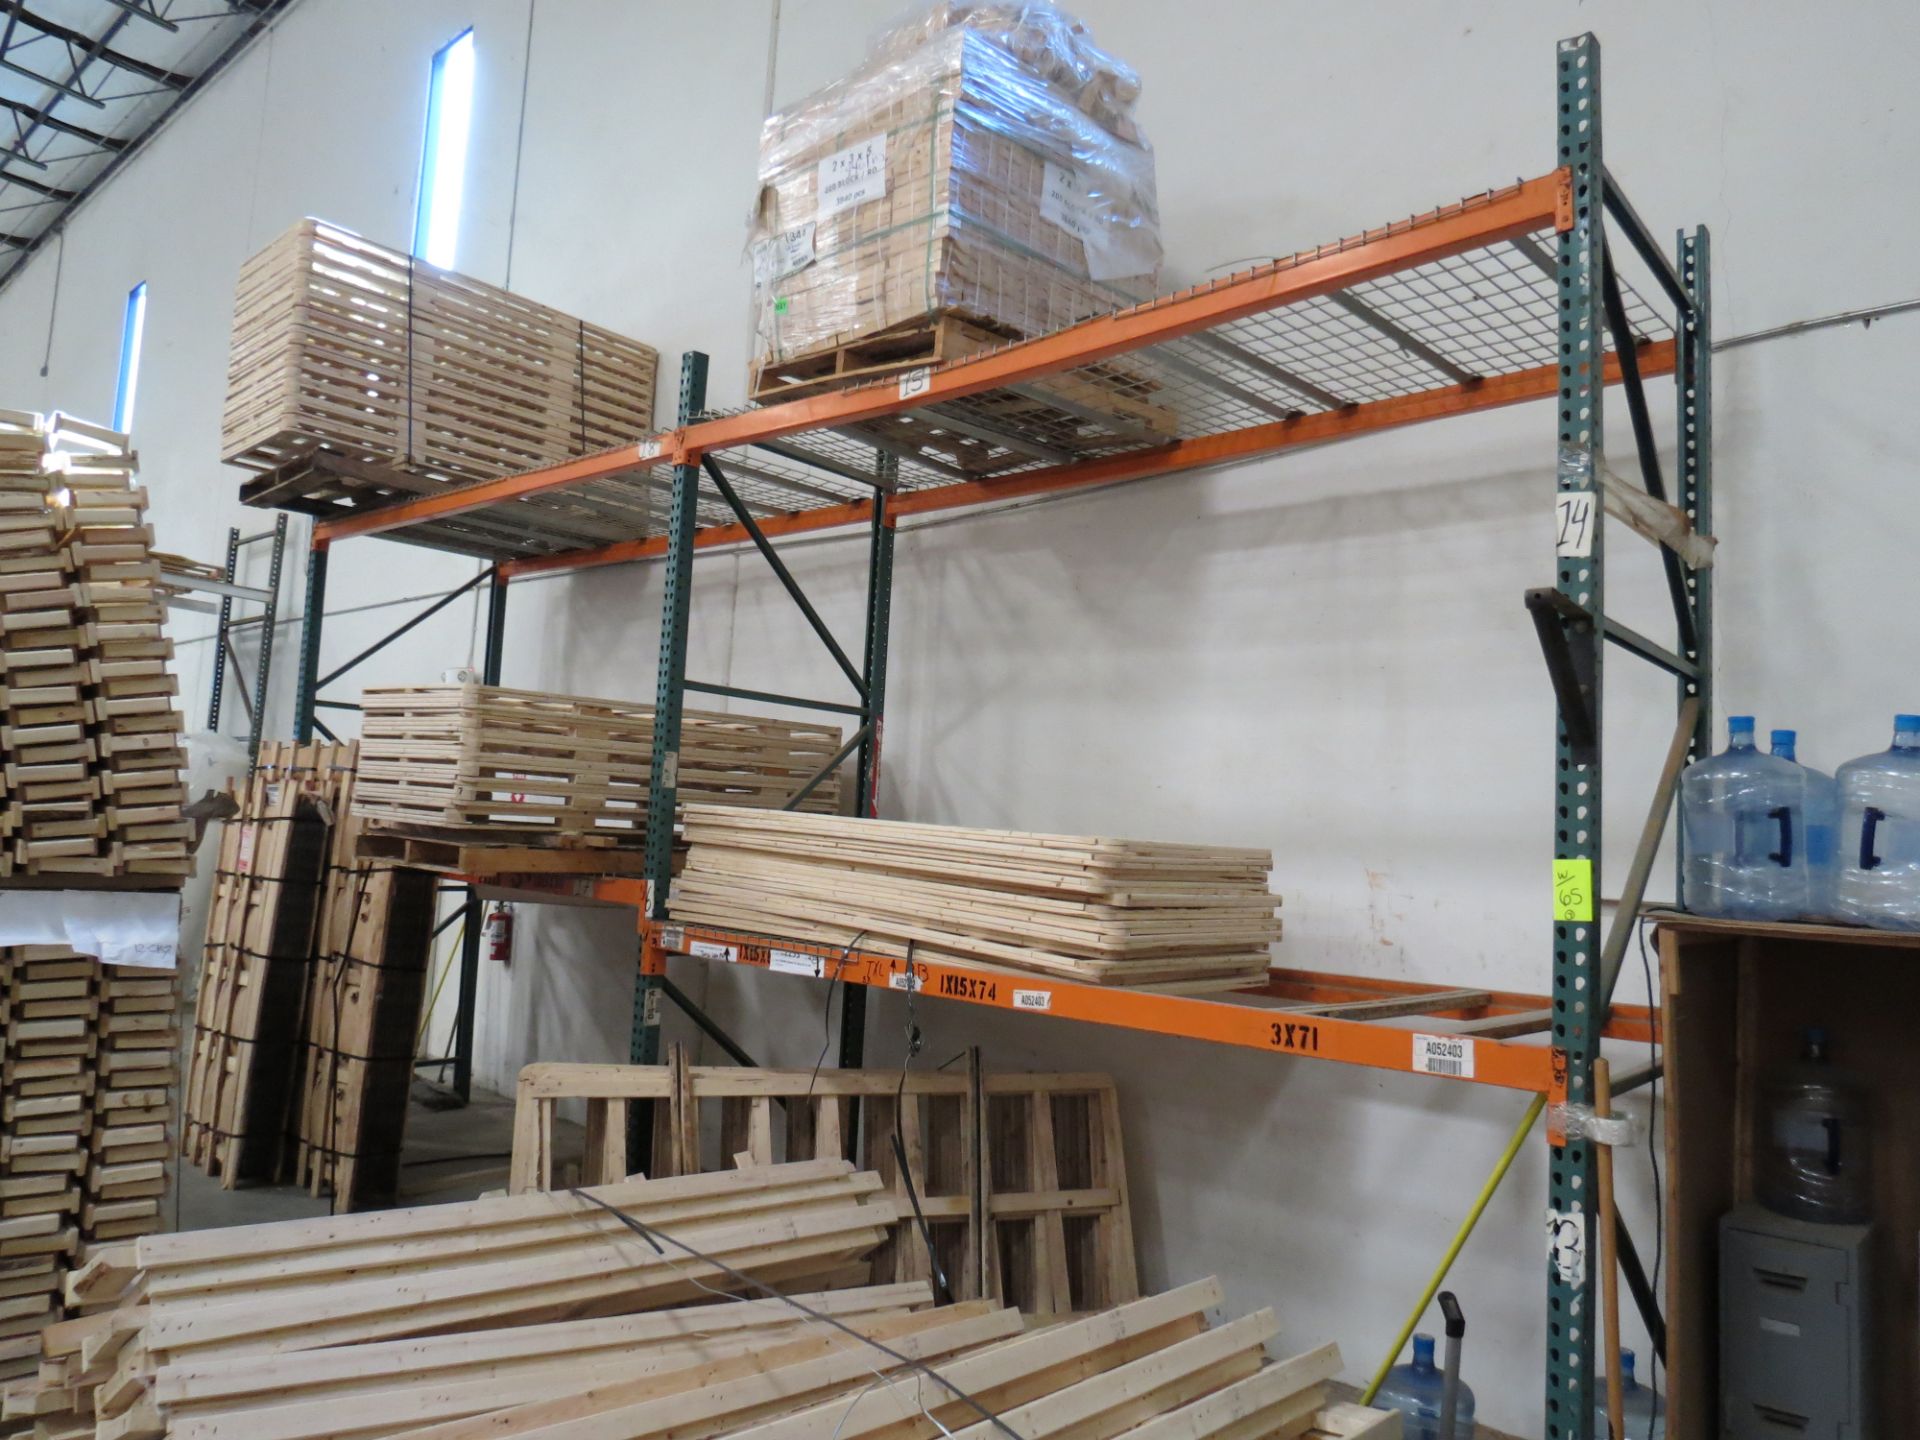 Sections of Pallet Racking Orange / Green - Image 2 of 4